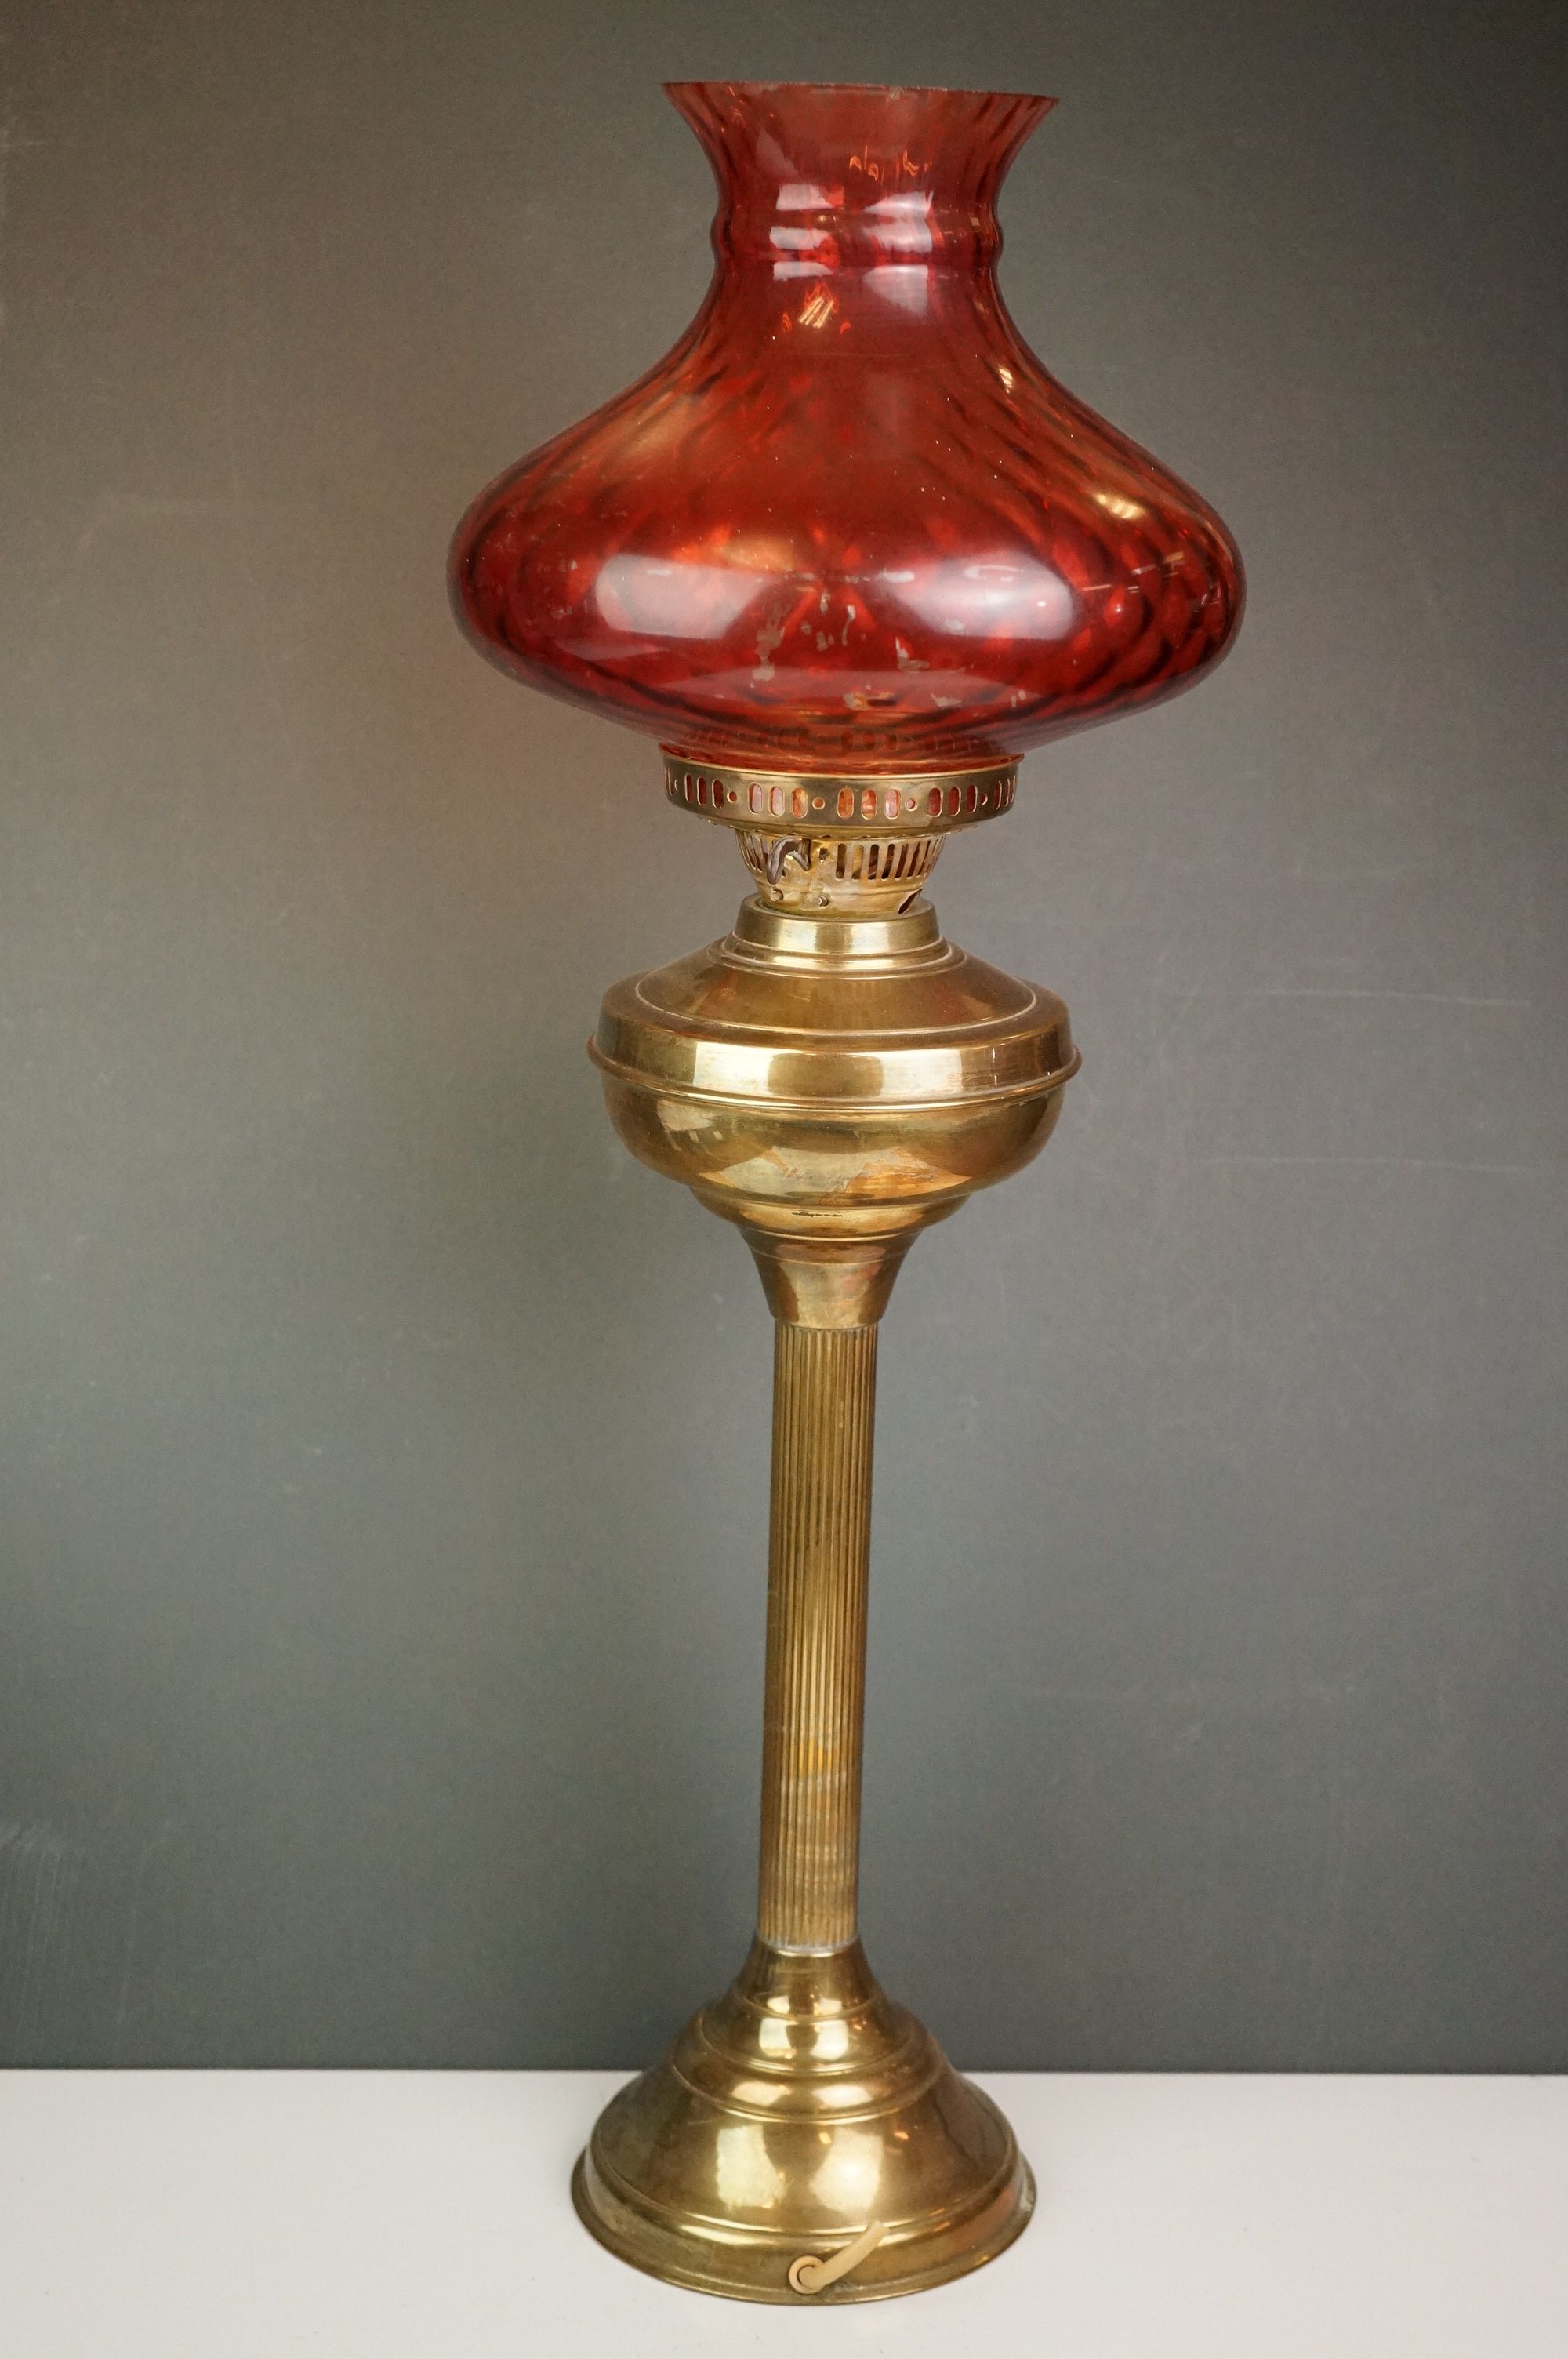 A vintage brass oil lamp with orange glass shade converted to electric.